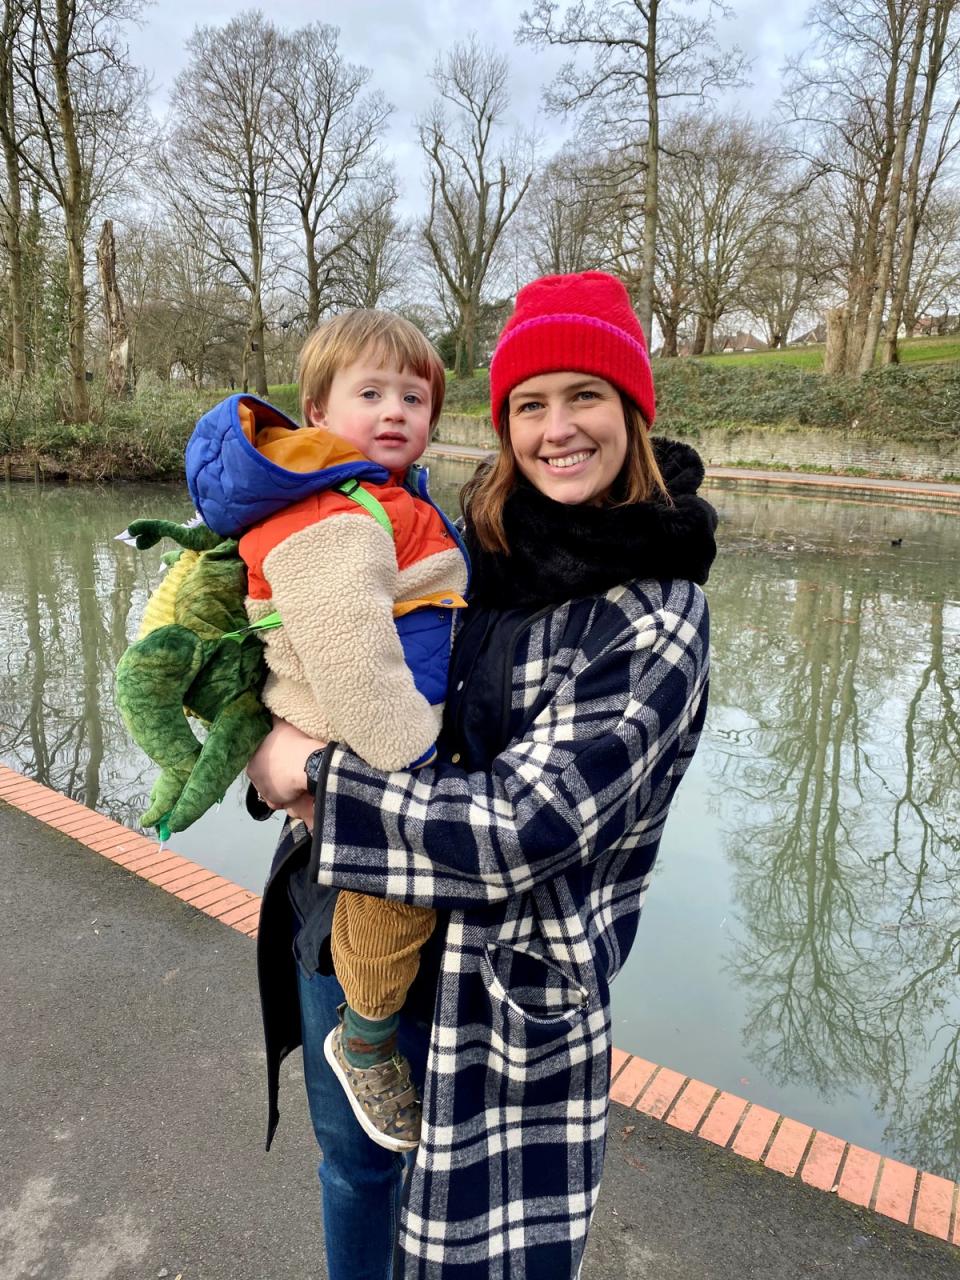 Laura Soar’s son Jasper will qualify for 15 hours of free childcare in April but the bill for his care will increase (Laura Soar)